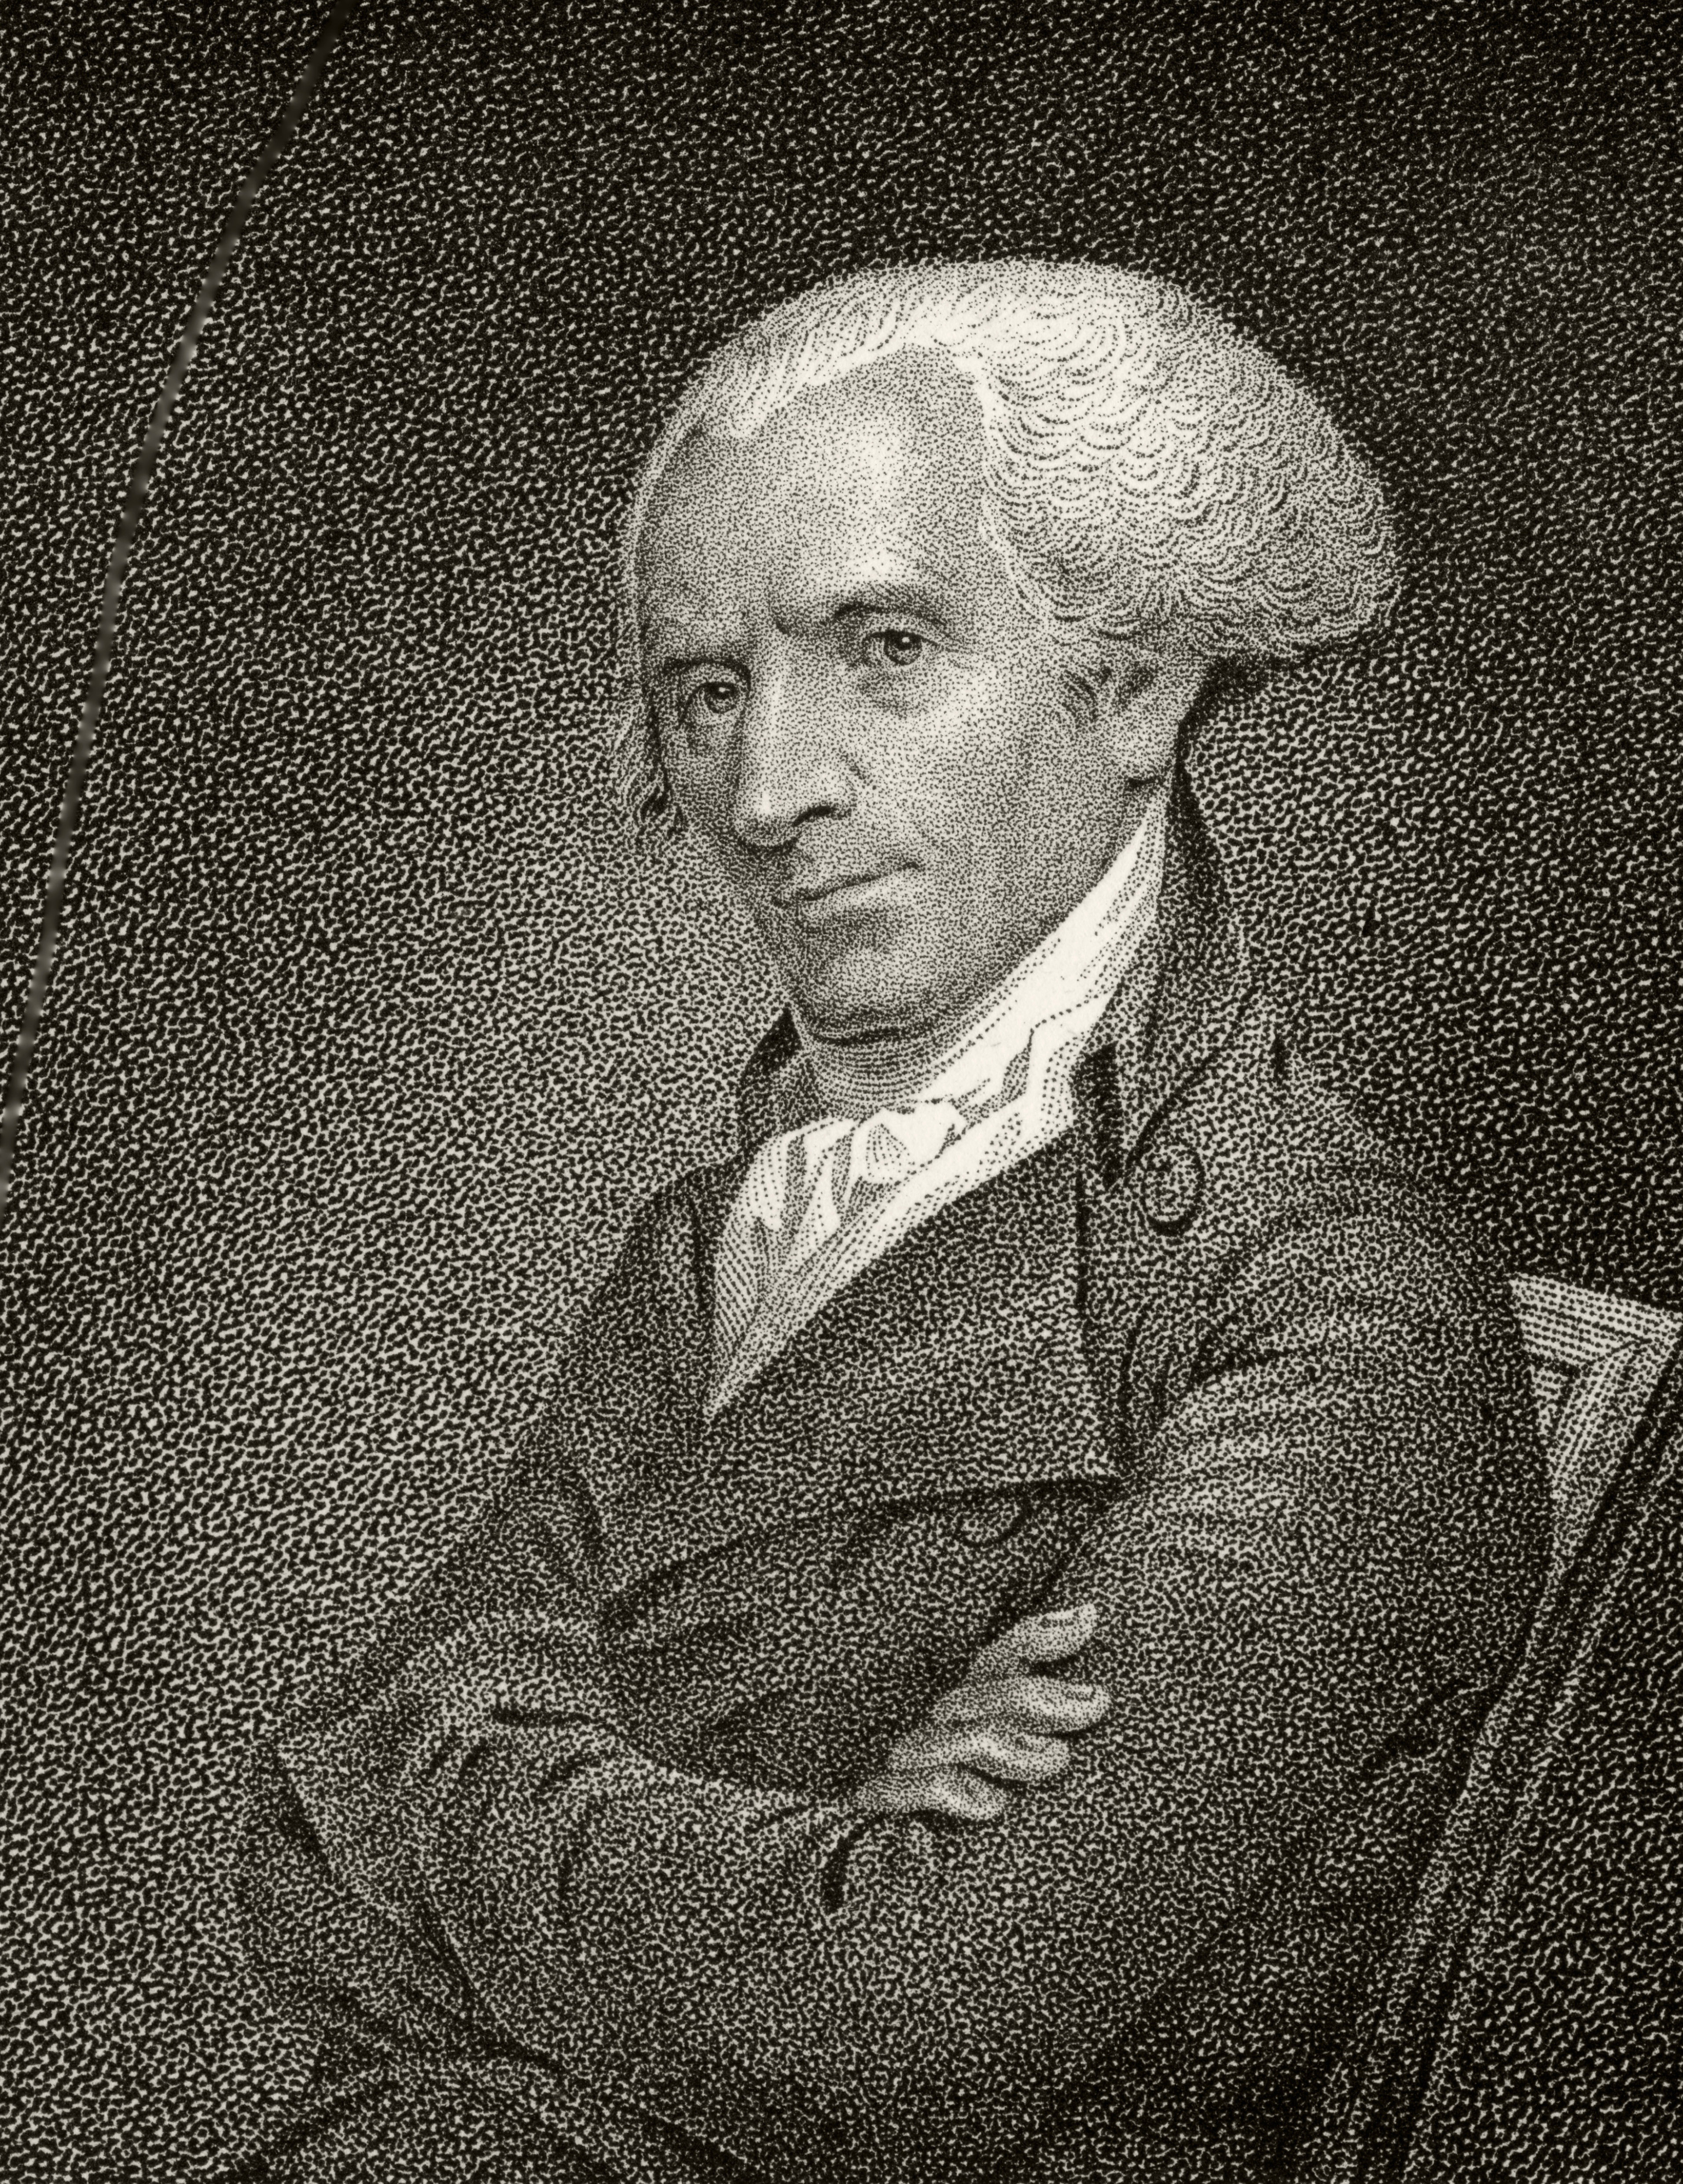 Elbridge Gerry 1744 to 1814 American statesman and Founding Father A signatory of Declaration of Independence 19th century engraving by J.B. Longacre from a drawing by Vanderlyn